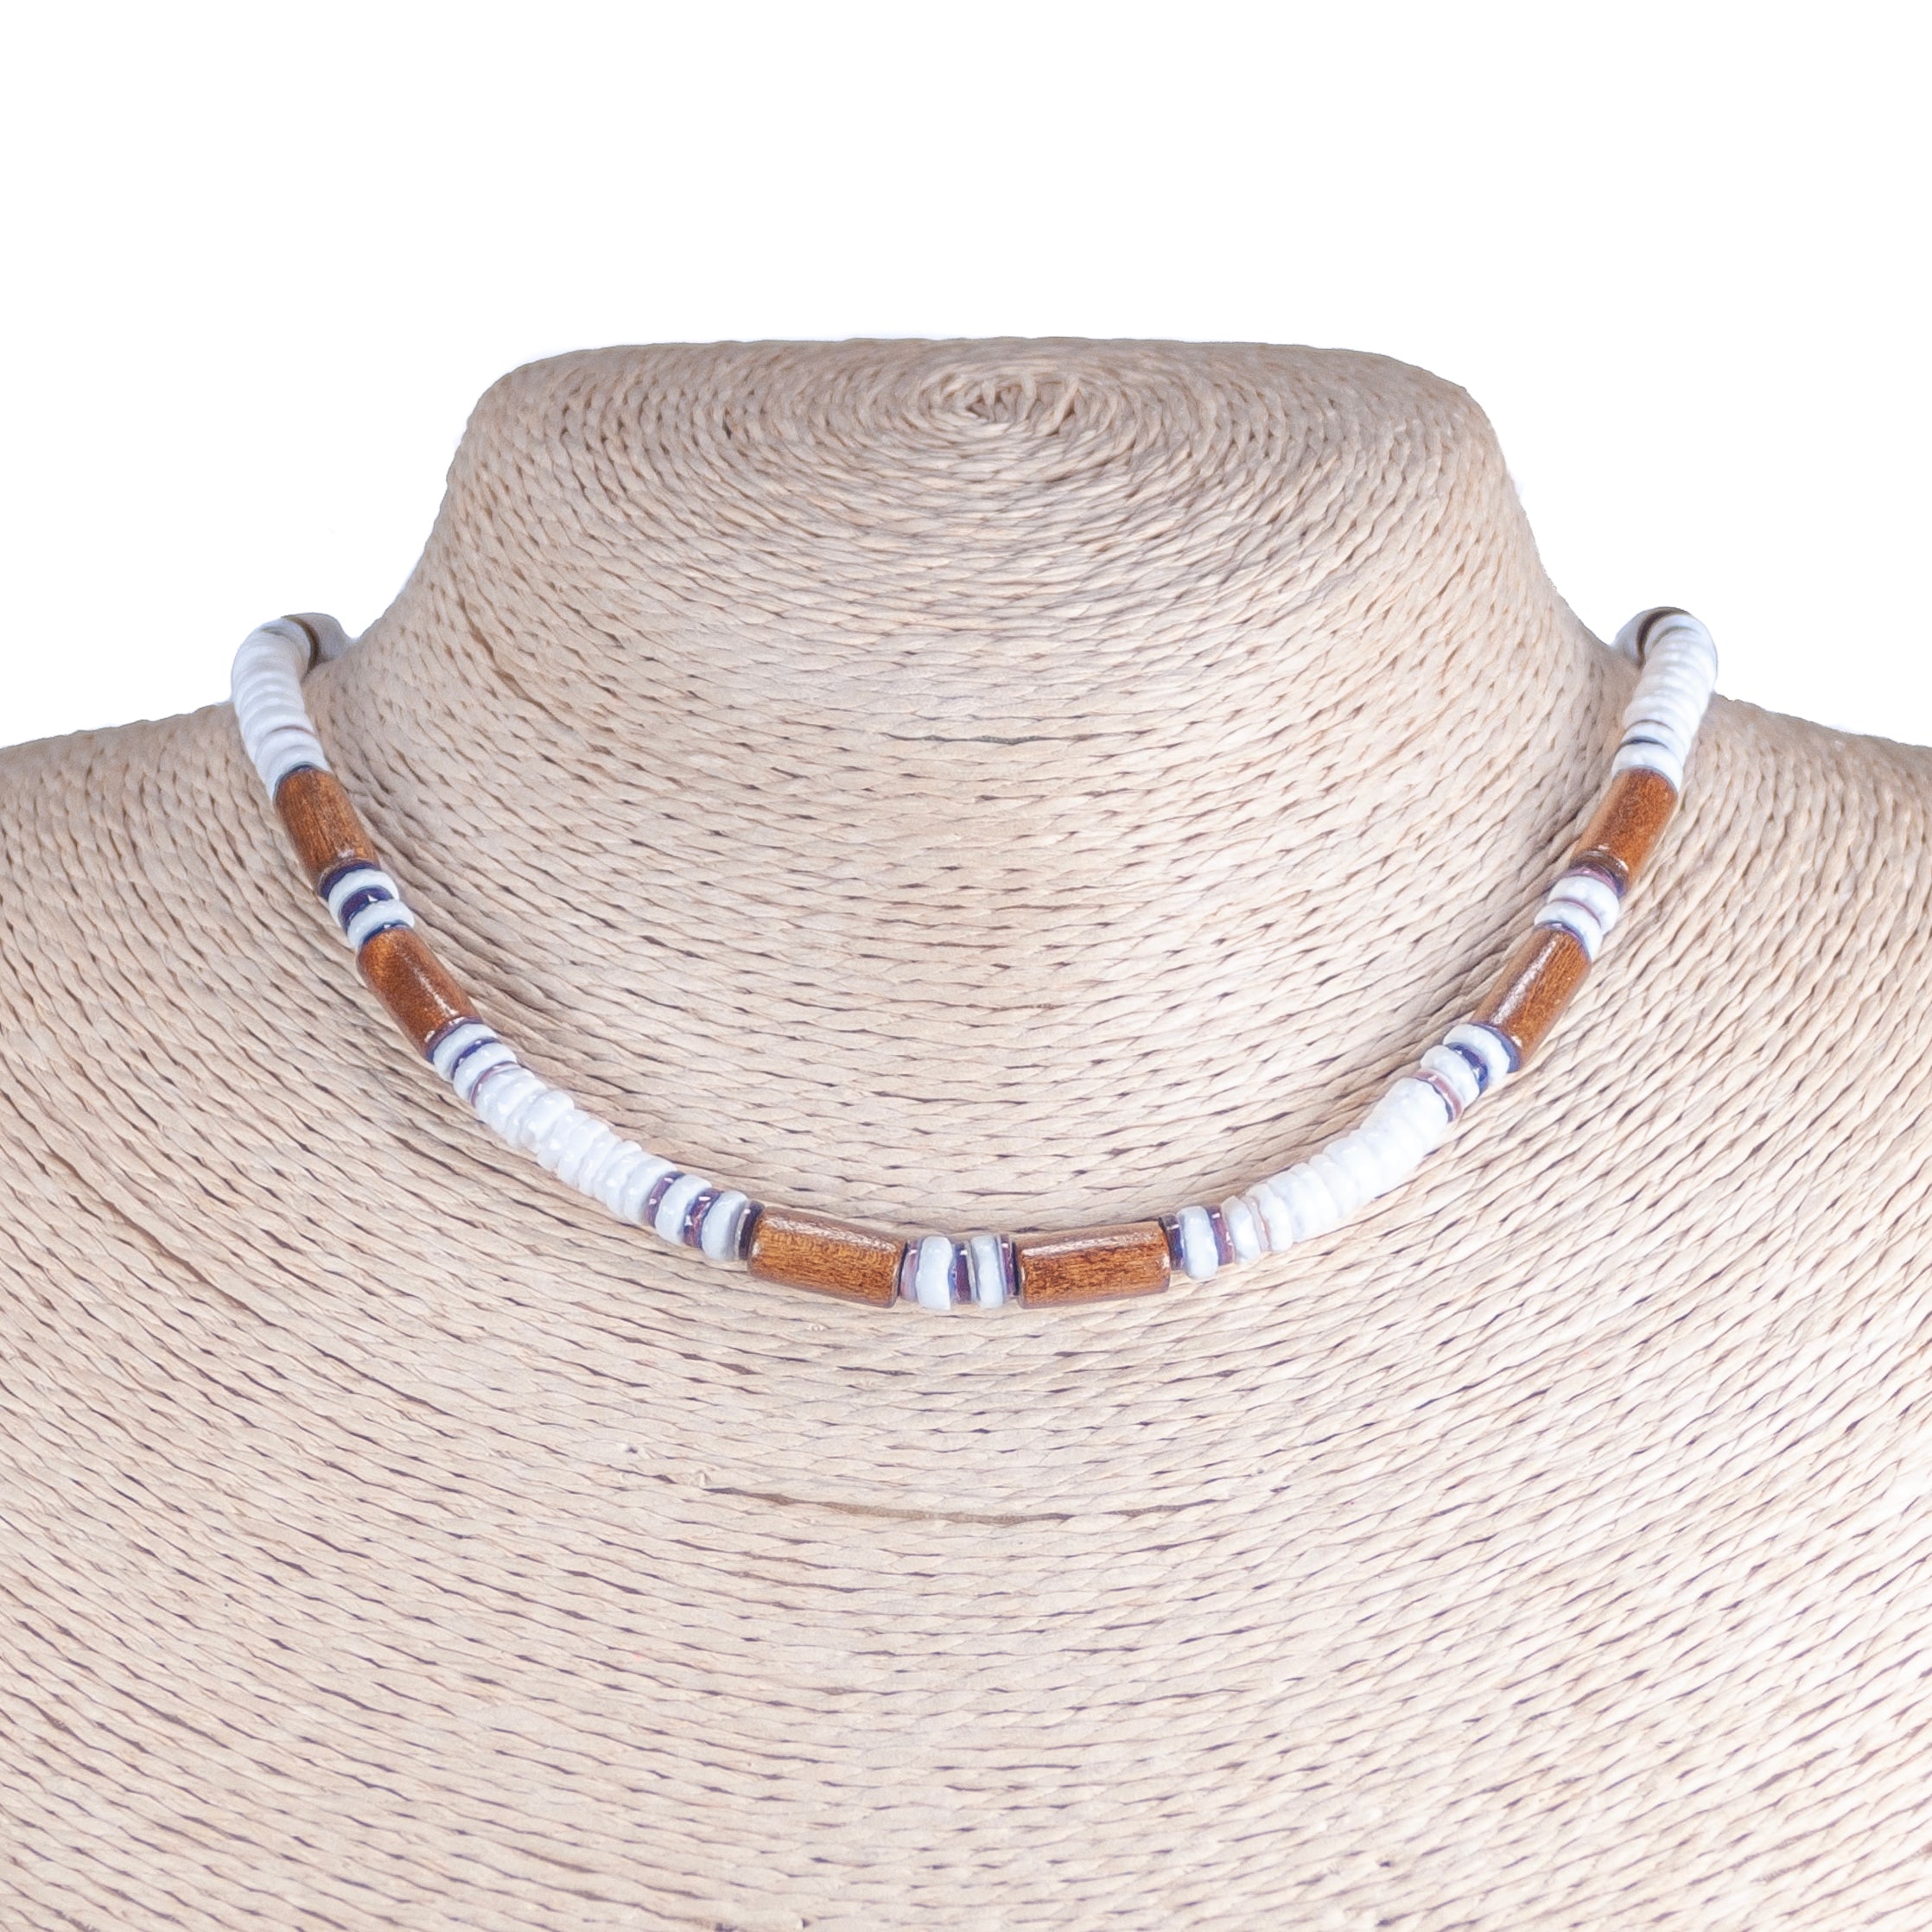 Puka Clam Shells Beaded Necklace with Wood Tubes & Violet Oyster Shell Beads